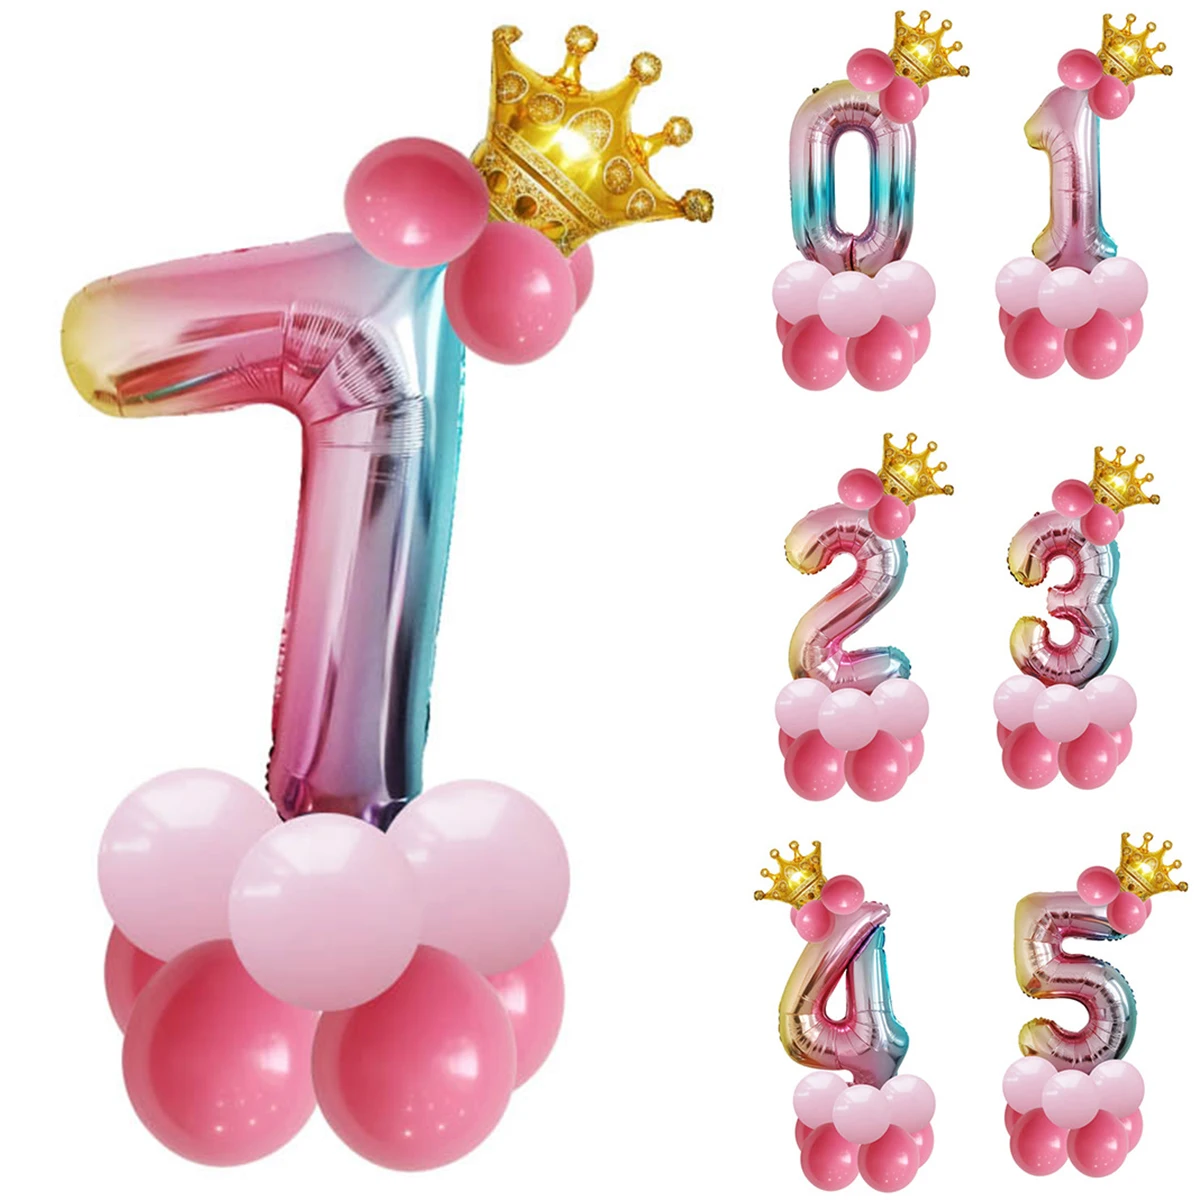 32" LETTER Foil Number Balloons Air Baloons Large Happy Birthday Party Ballons 